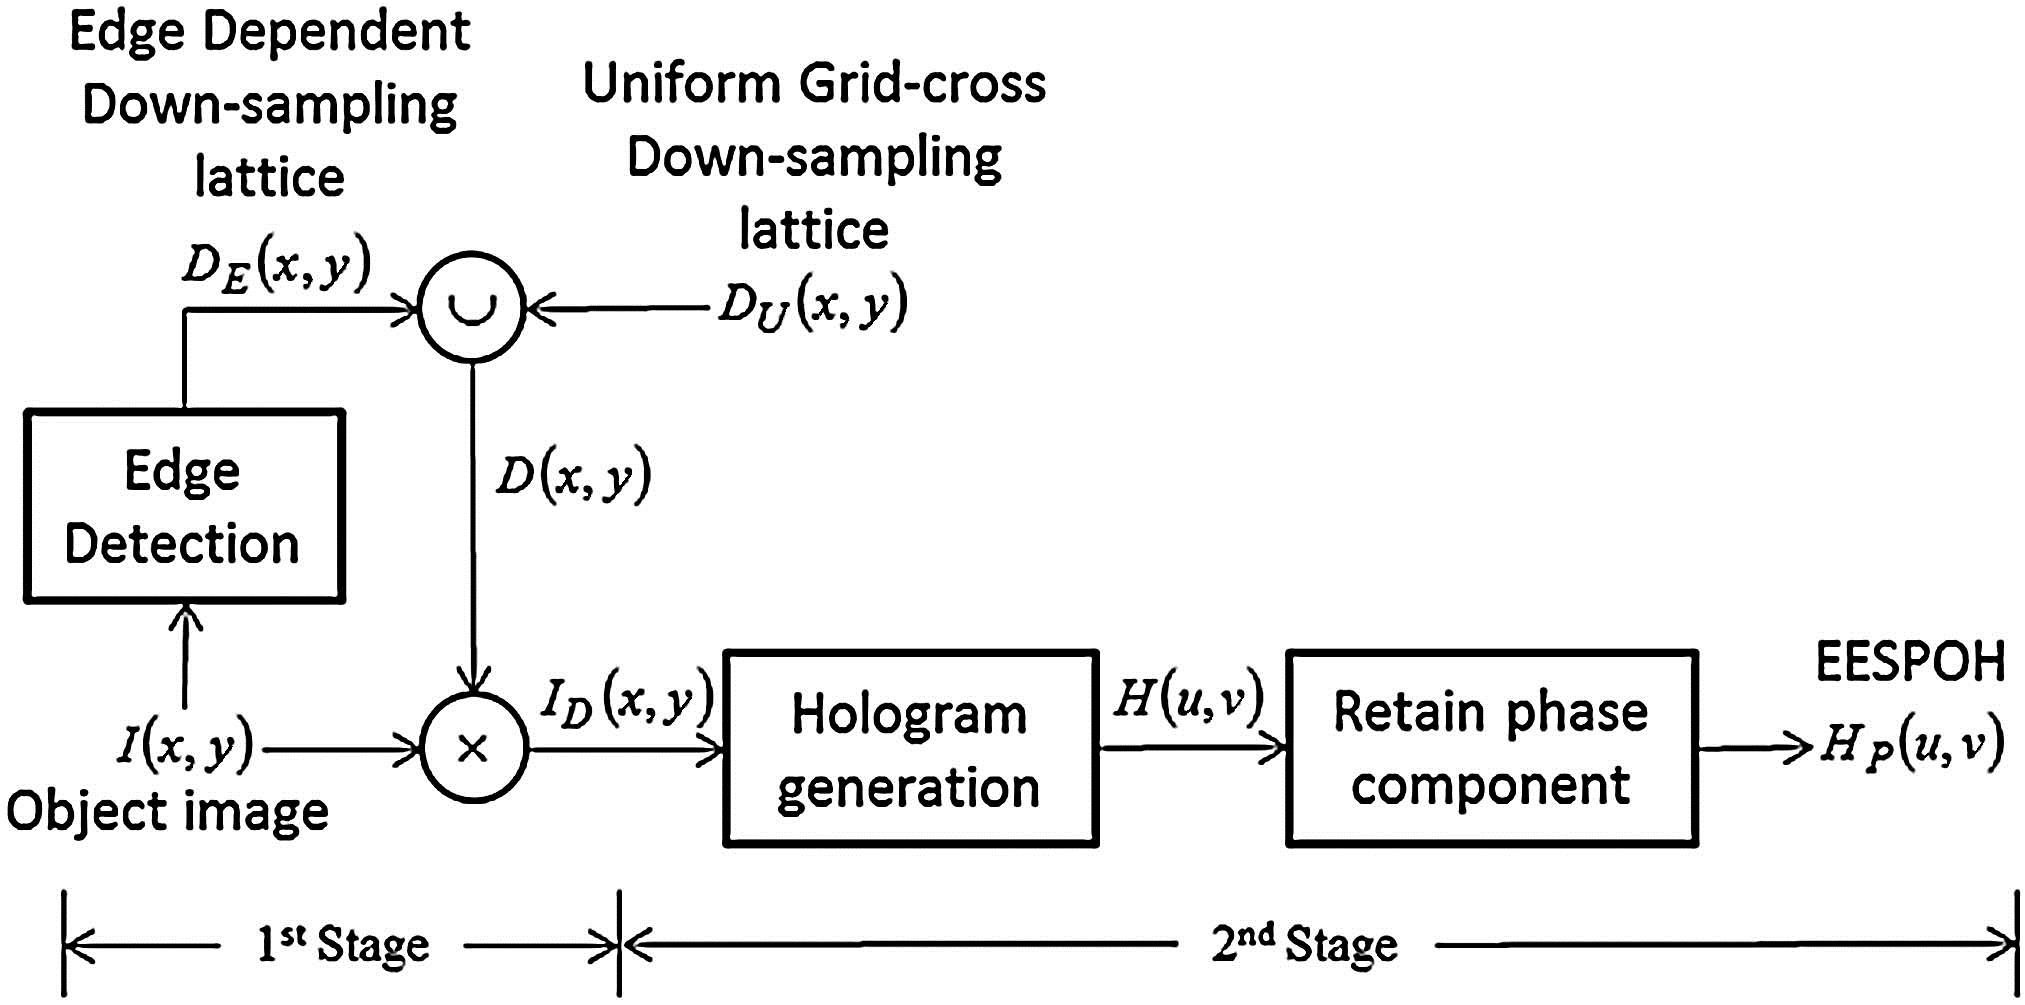 Proposed method for generating the EESPOH.